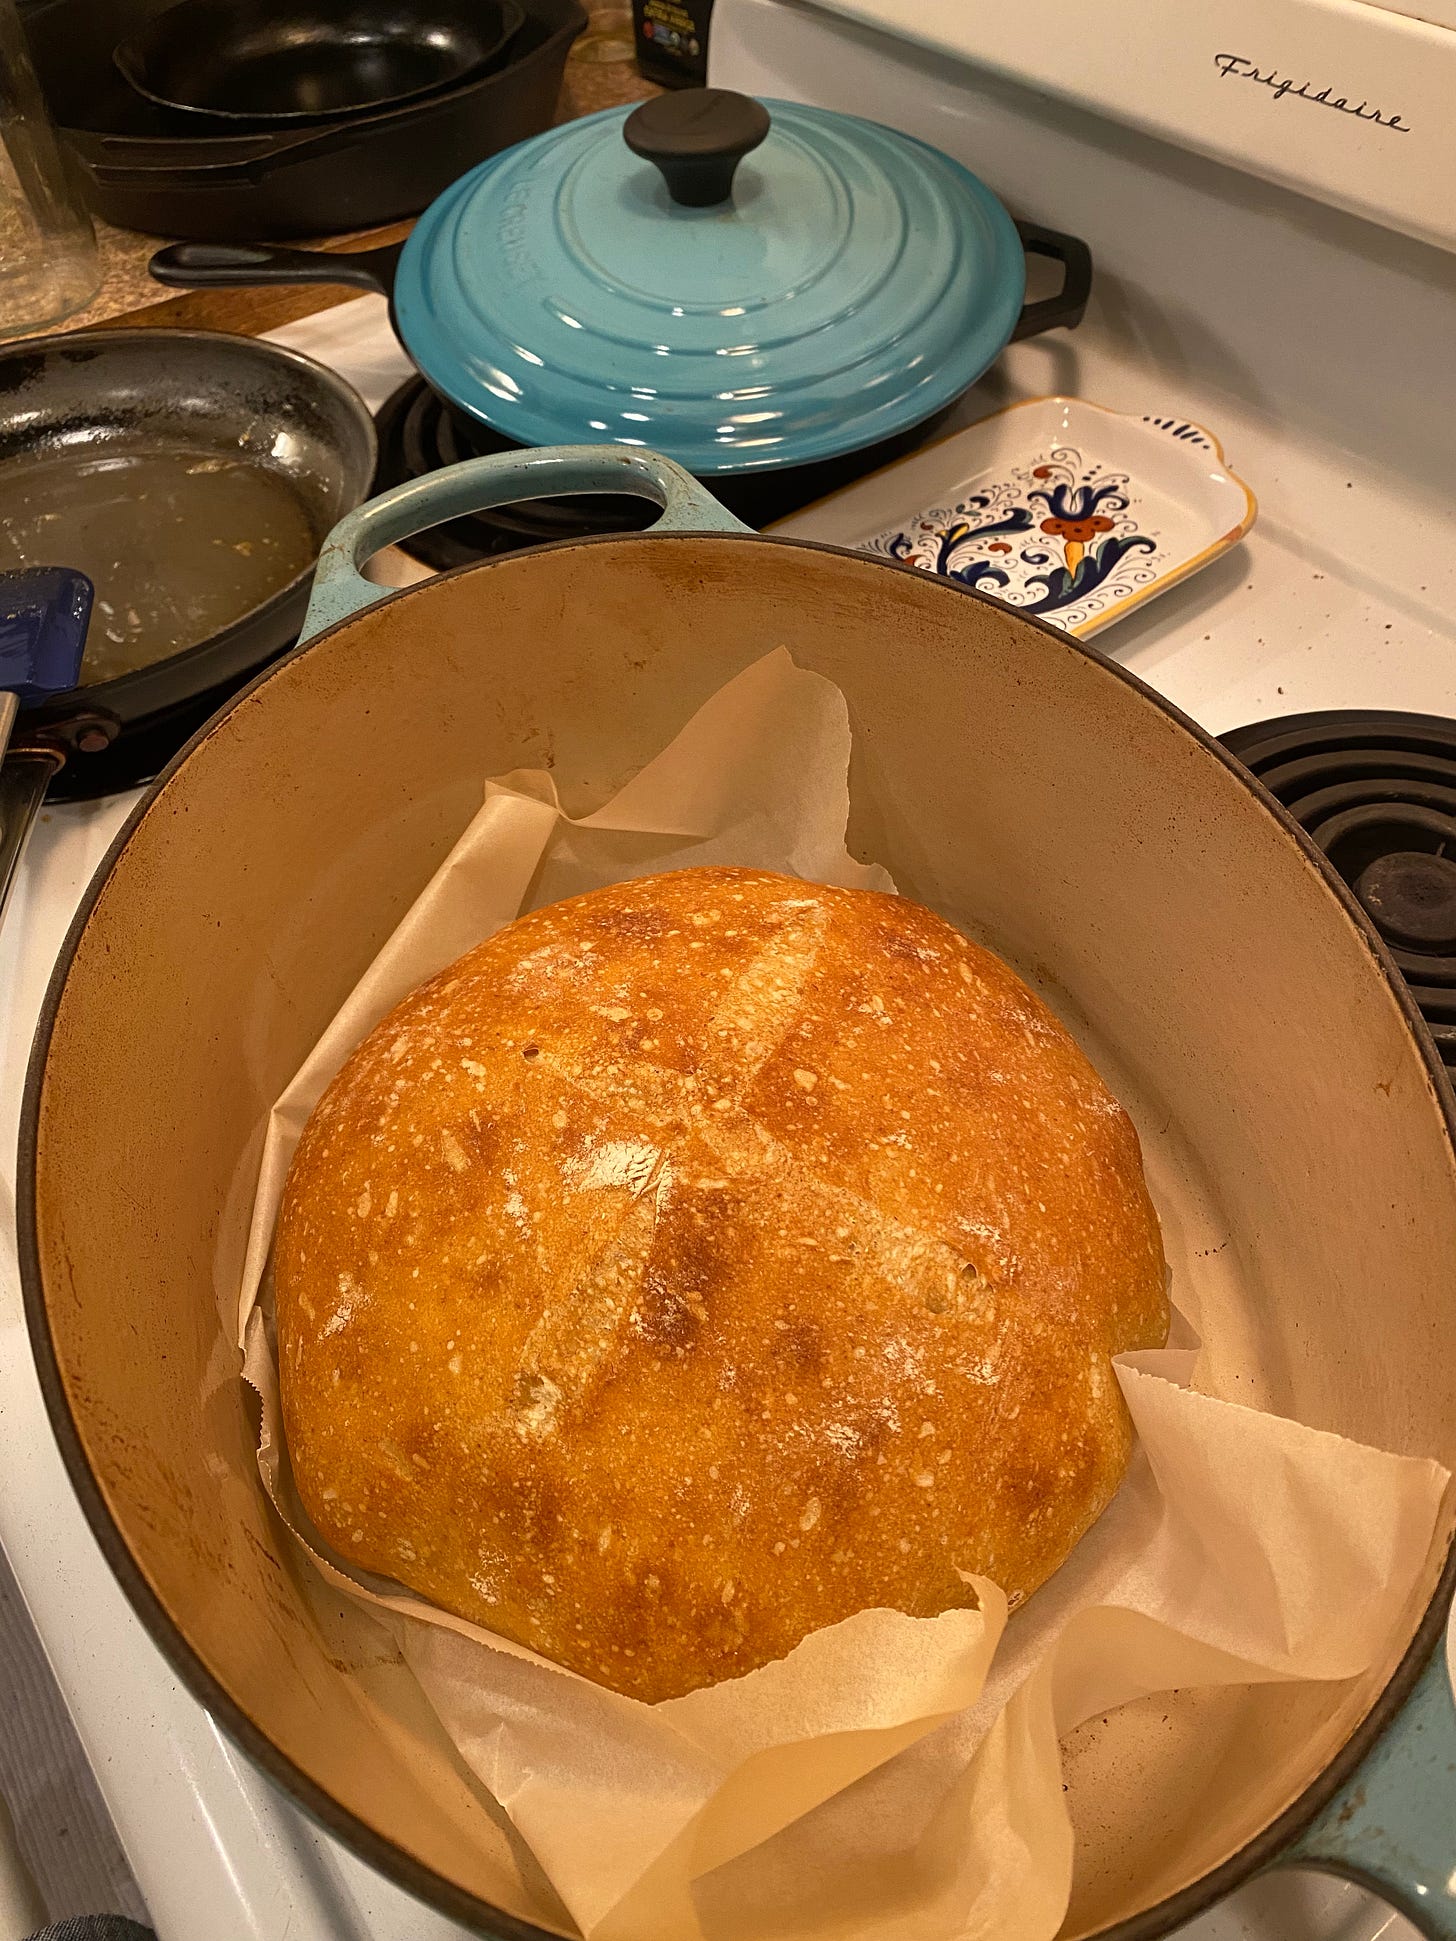 A sourdough boule with an X score on top, resting in an oval Le Creuset dutch oven with parchment on the bottom. The lid for the pot is sitting behind it on the stove.